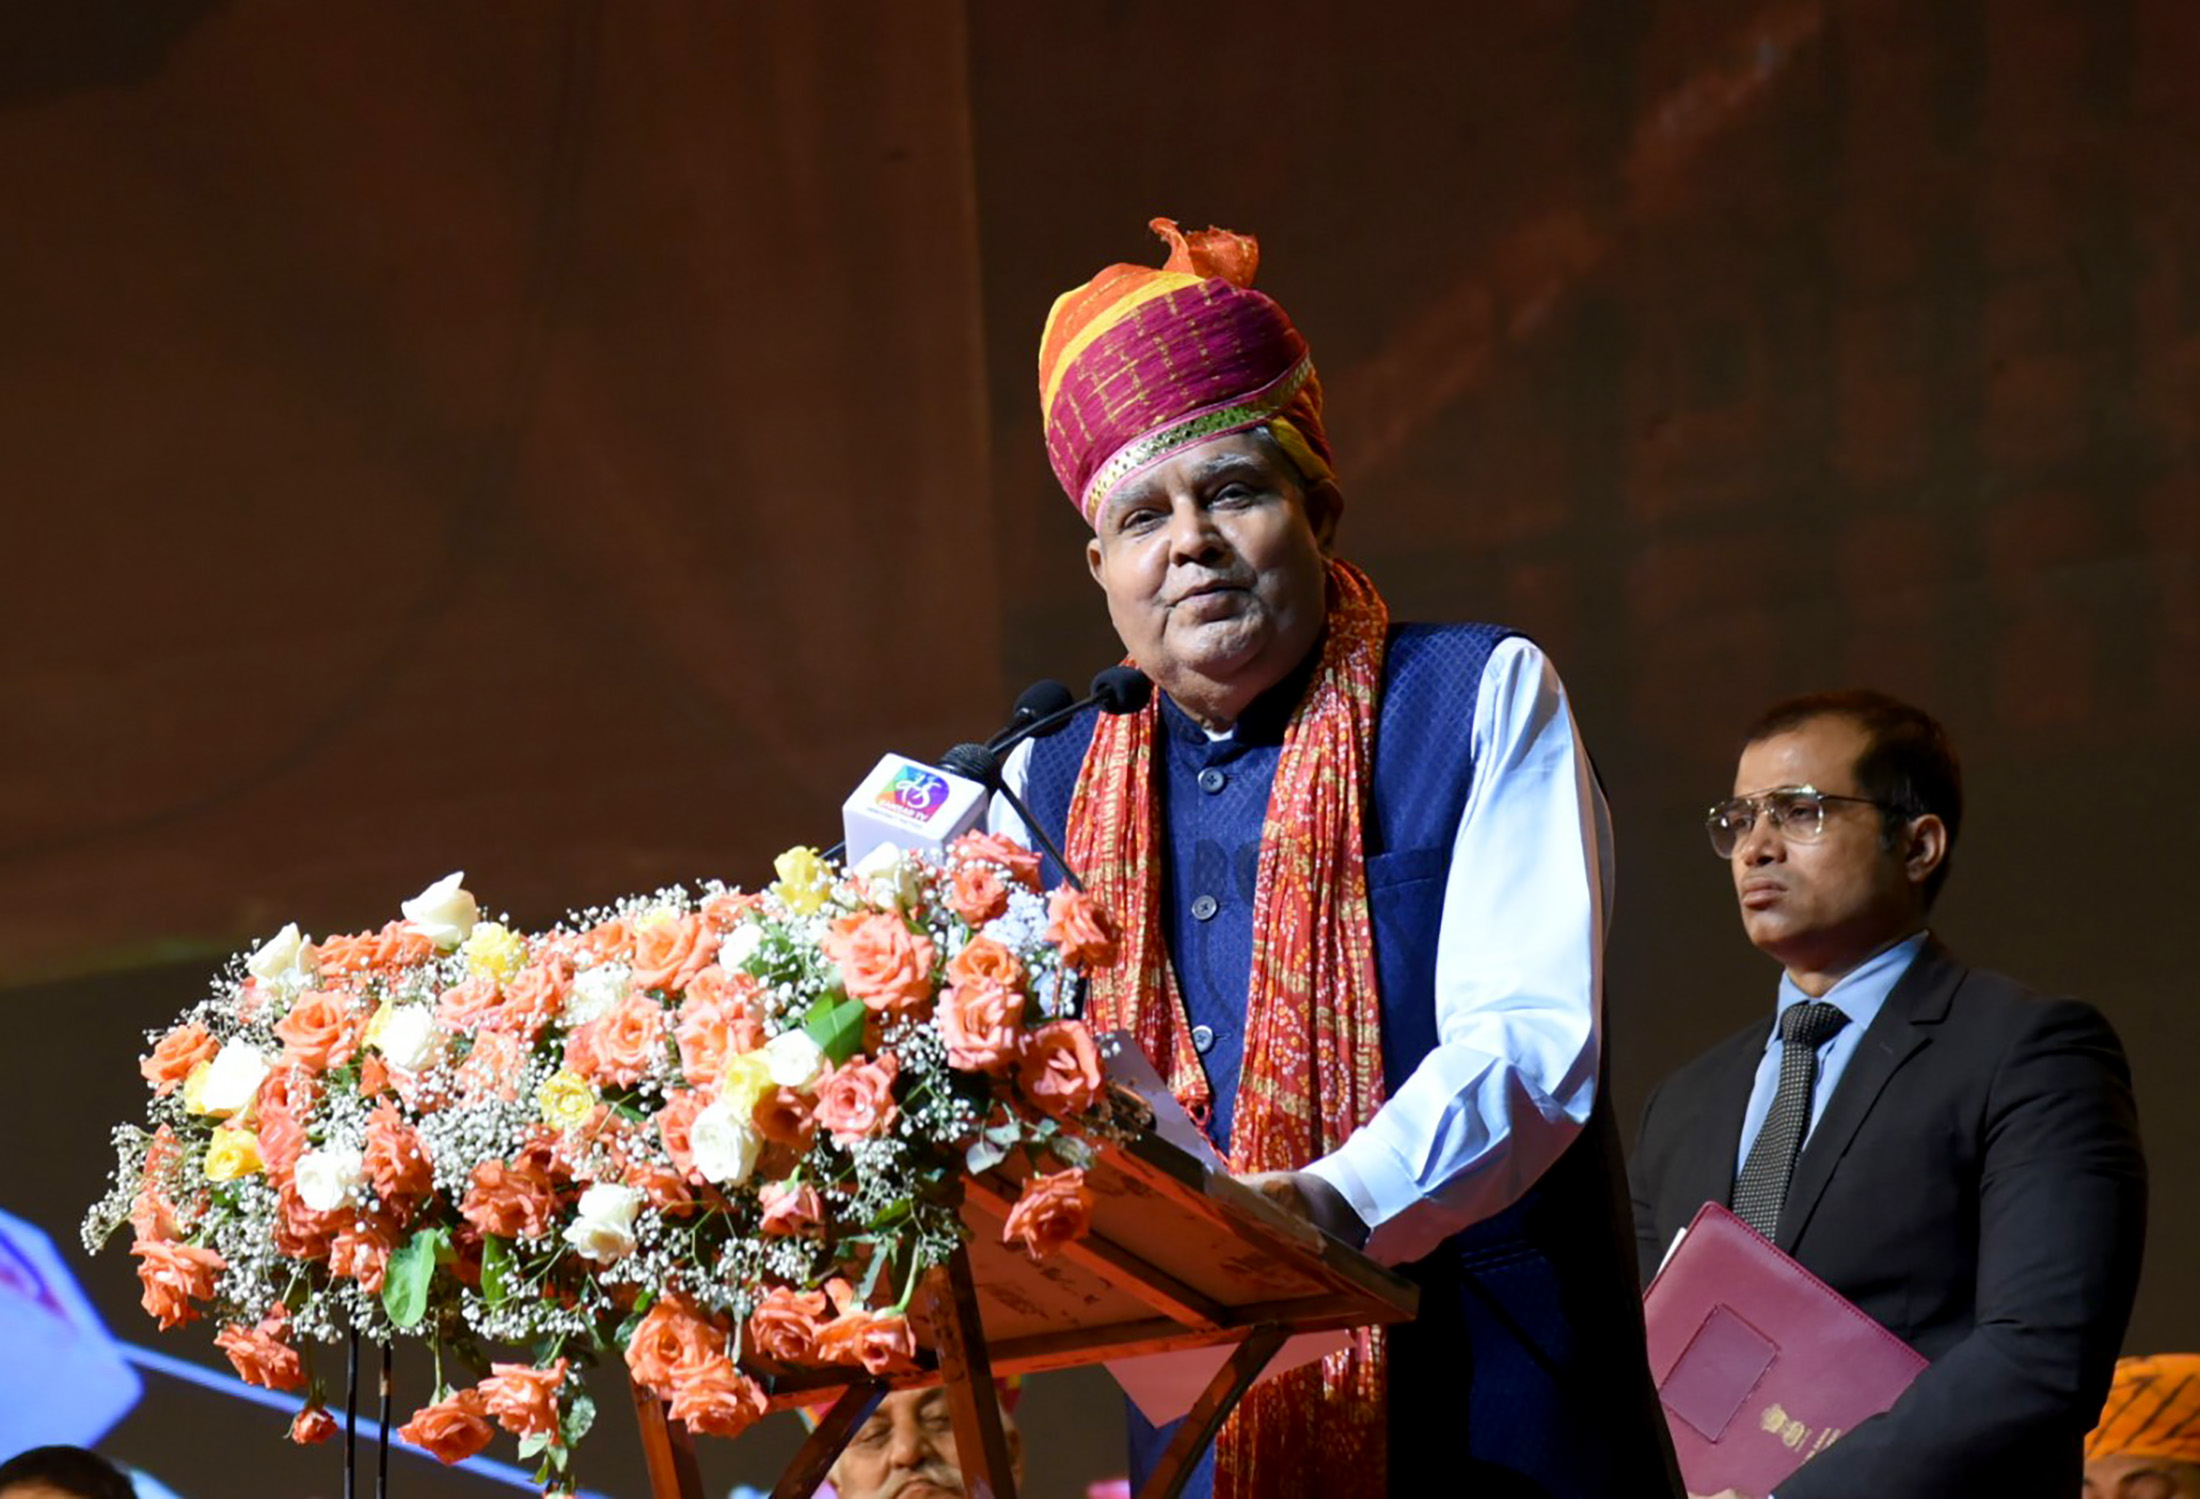 The Vice President, Shri Jagdeep Dhankhar at a felicitation ceremony organised in his honour by Rajasthan-Haryana Samaj in Surat on October 13, 2022.